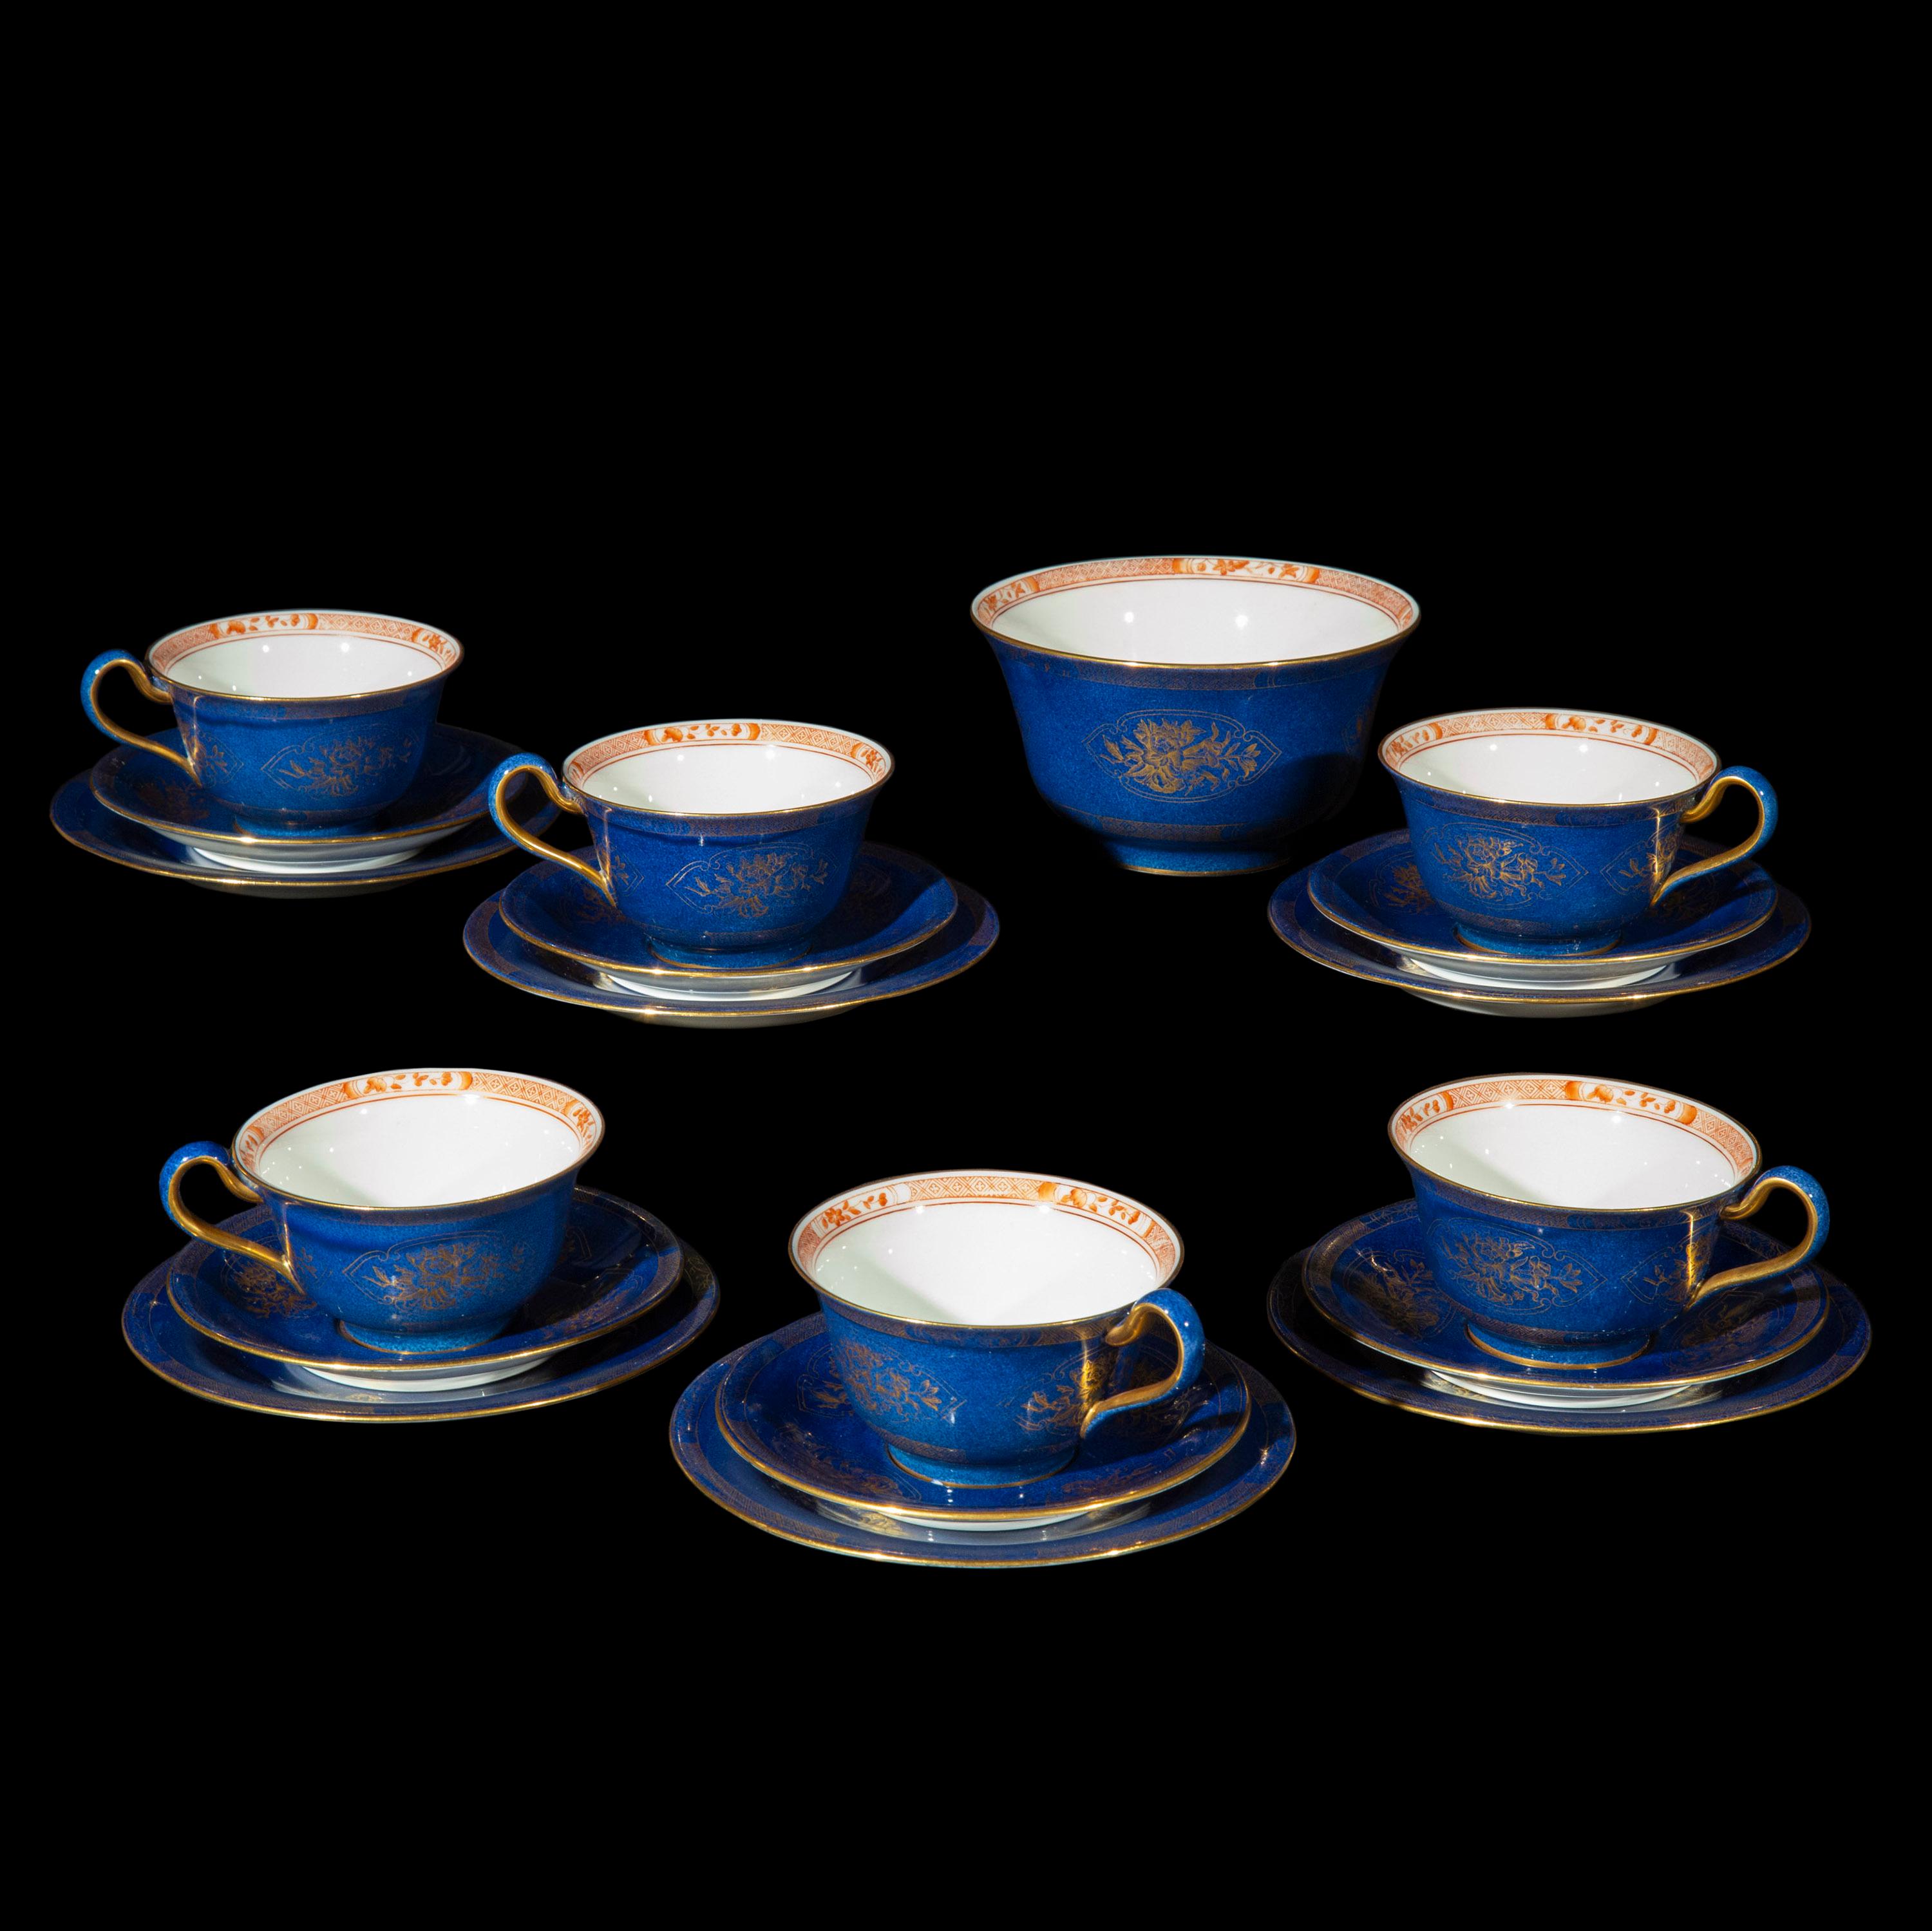 A very fine Wedgwood chinoiserie style luster ware porcelain tea set for six persons.
England, circa 1900.

Why we like it
The deep, mottled ‘powder blue’ with typical overpainted designs in gilt, is reminiscent of the Chinese porcelain of the